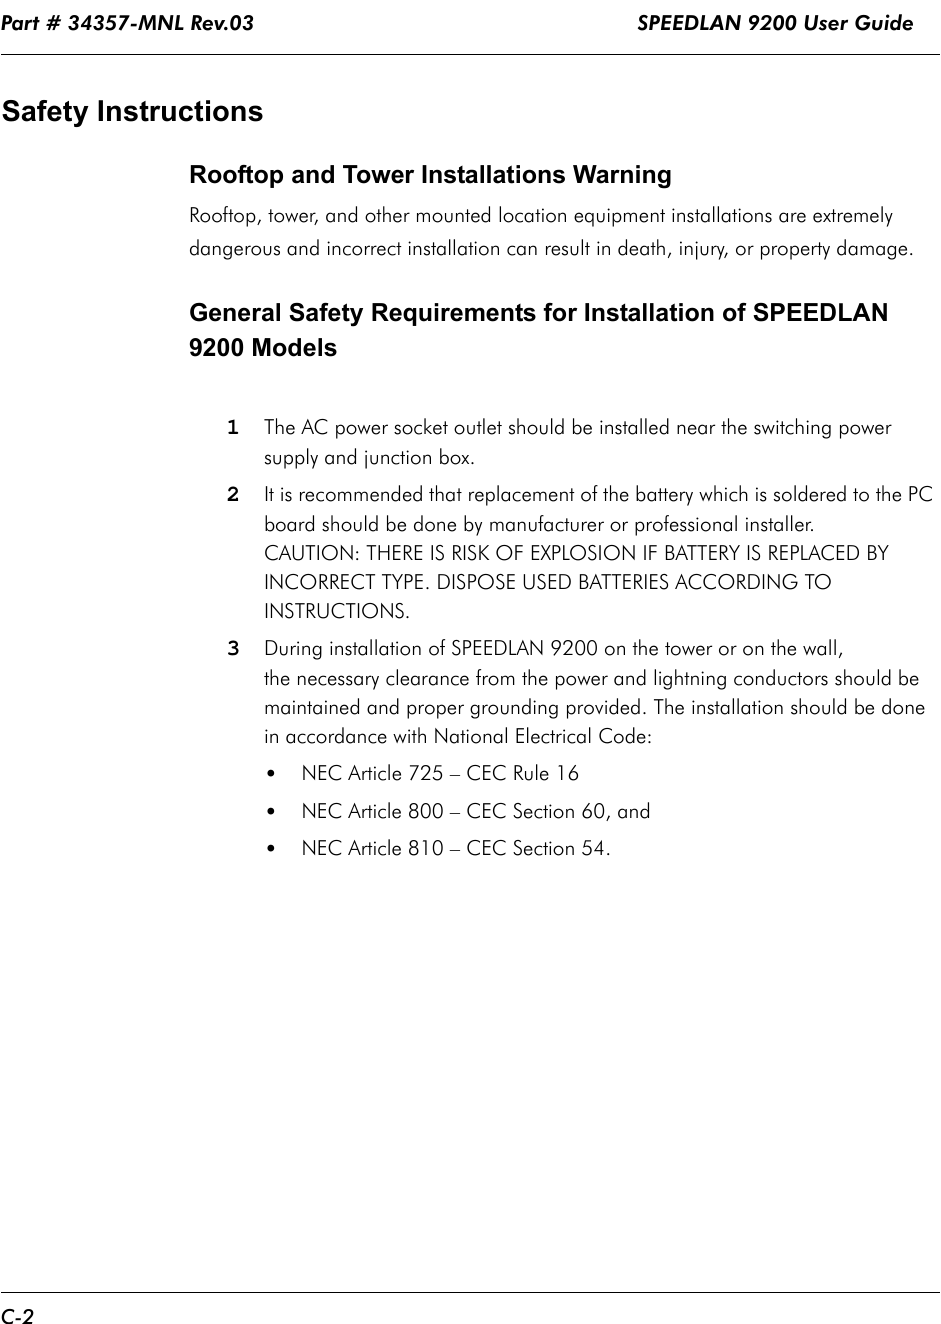 Part # 34357-MNL Rev.03                                                              SPEEDLAN 9200 User Guide C-2Safety InstructionsRooftop and Tower Installations Warning Rooftop, tower, and other mounted location equipment installations are extremely dangerous and incorrect installation can result in death, injury, or property damage.General Safety Requirements for Installation of SPEEDLAN 9200 Models1The AC power socket outlet should be installed near the switching power supply and junction box.2It is recommended that replacement of the battery which is soldered to the PC board should be done by manufacturer or professional installer. CAUTION: THERE IS RISK OF EXPLOSION IF BATTERY IS REPLACED BY INCORRECT TYPE. DISPOSE USED BATTERIES ACCORDING TO INSTRUCTIONS.3During installation of SPEEDLAN 9200 on the tower or on the wall, the necessary clearance from the power and lightning conductors should be maintained and proper grounding provided. The installation should be done in accordance with National Electrical Code:•NEC Article 725 – CEC Rule 16•NEC Article 800 – CEC Section 60, and•NEC Article 810 – CEC Section 54.              